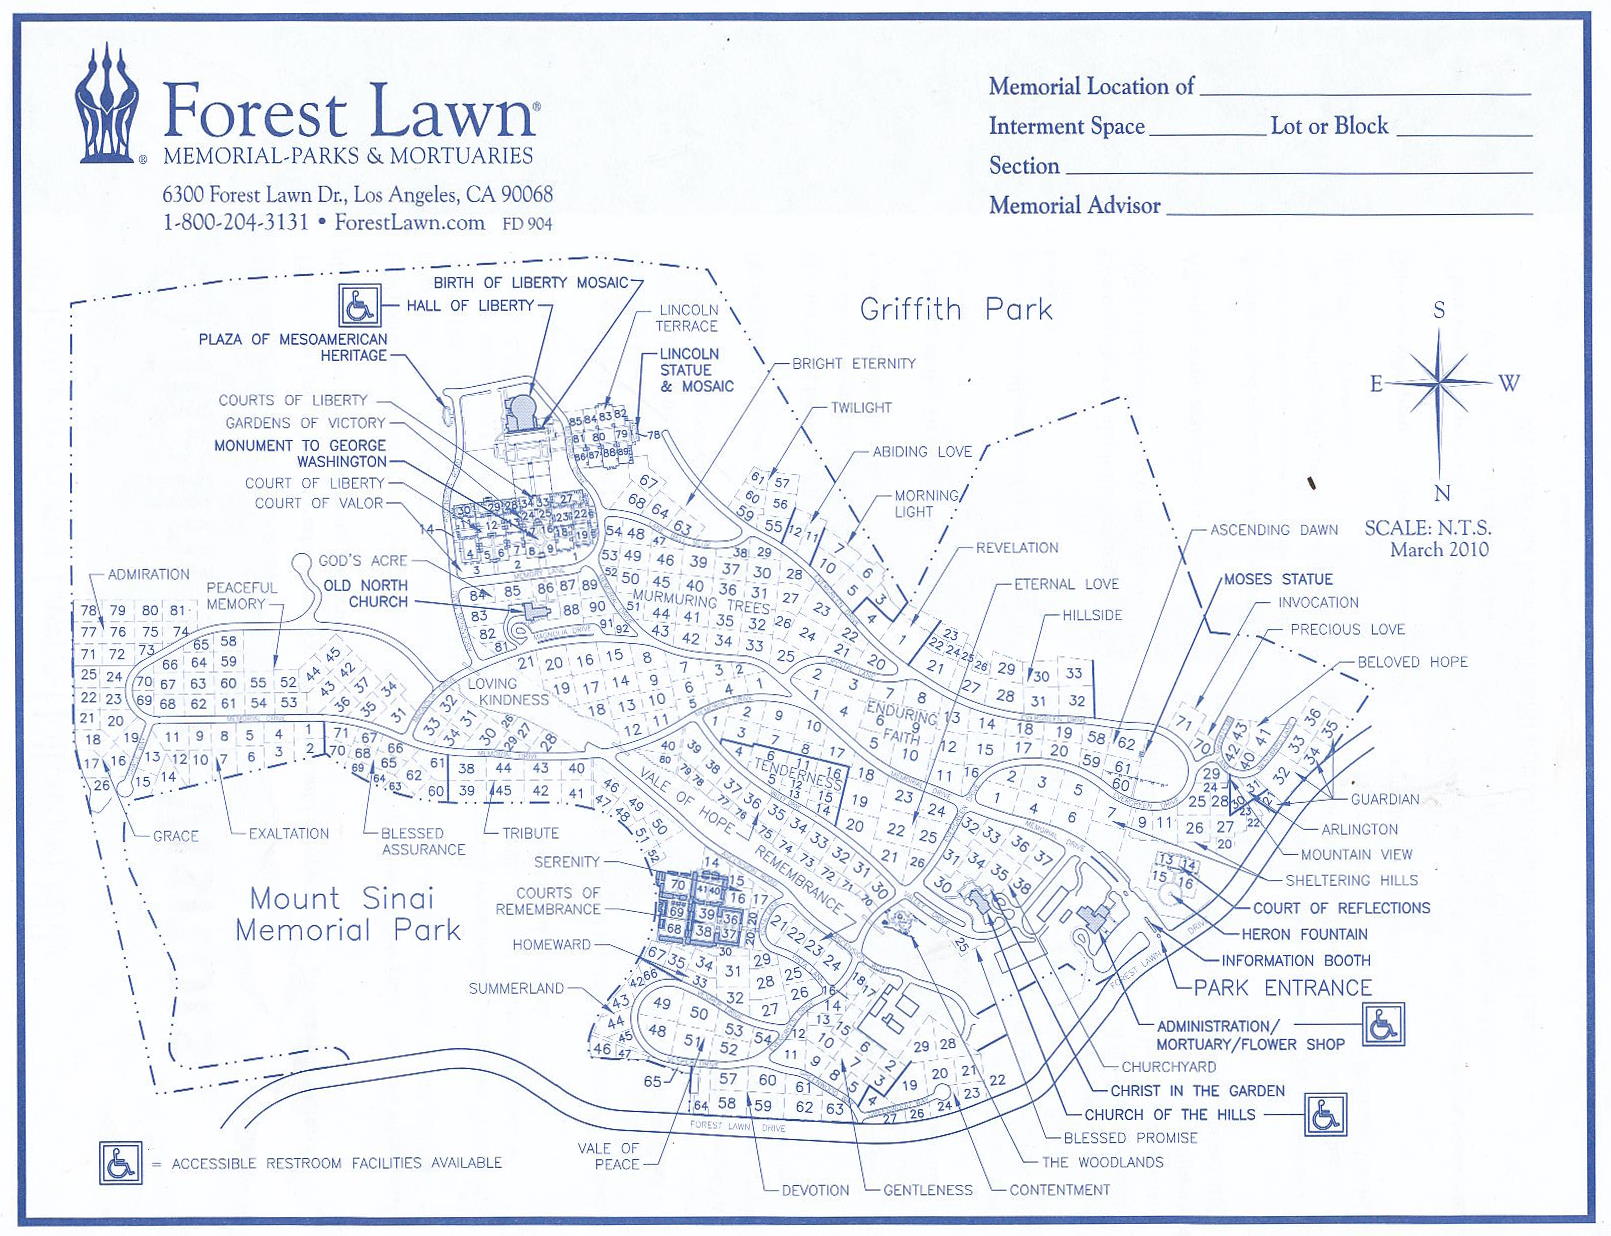 Map of Forest Lawn Memorial Park - Hollywood Hills in Los Angeles, California.